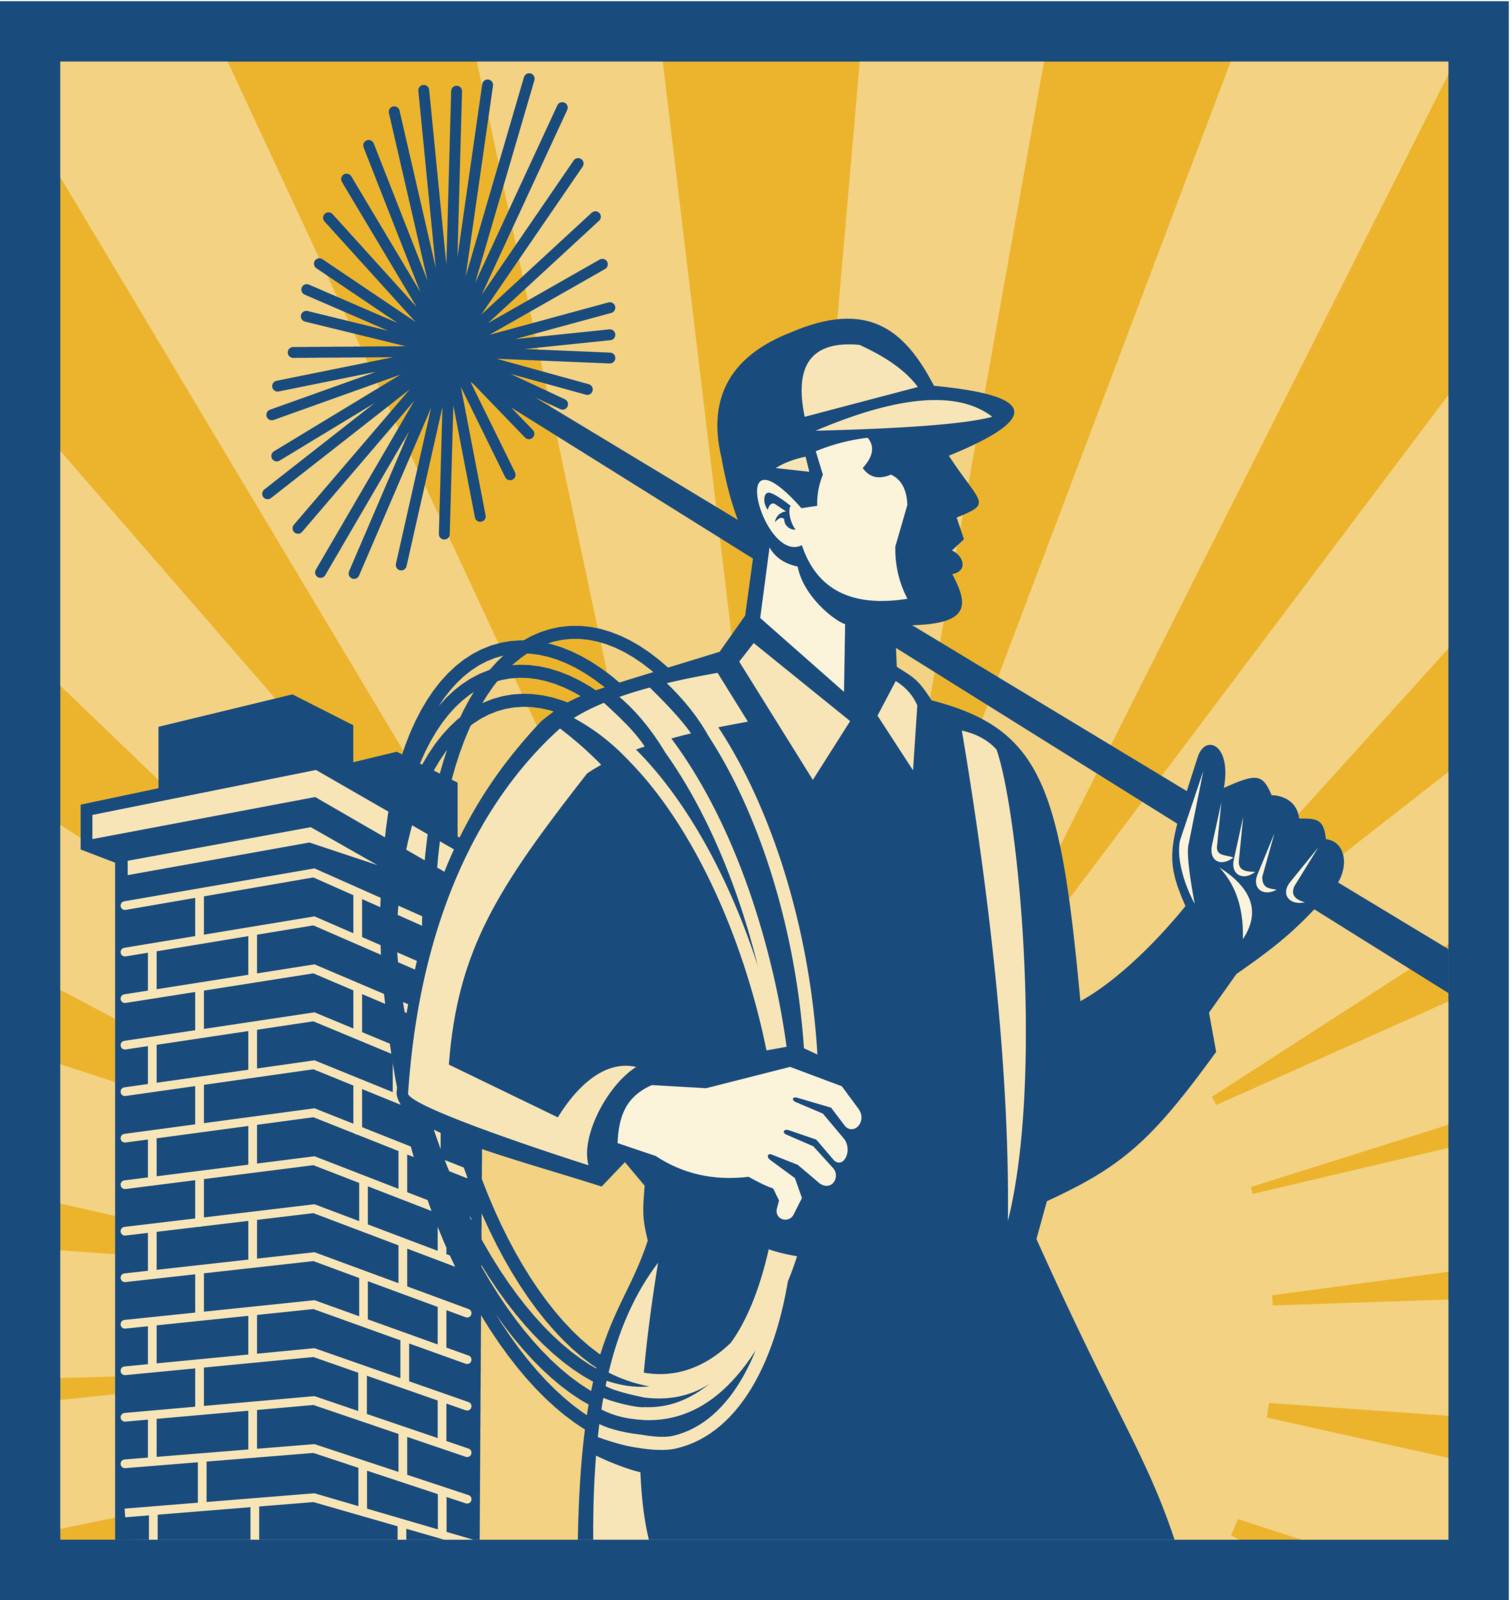 Illustration of a chimney sweeper cleaner worker with sweep broom viewed from side with chimney stack set inside square done in retro style.